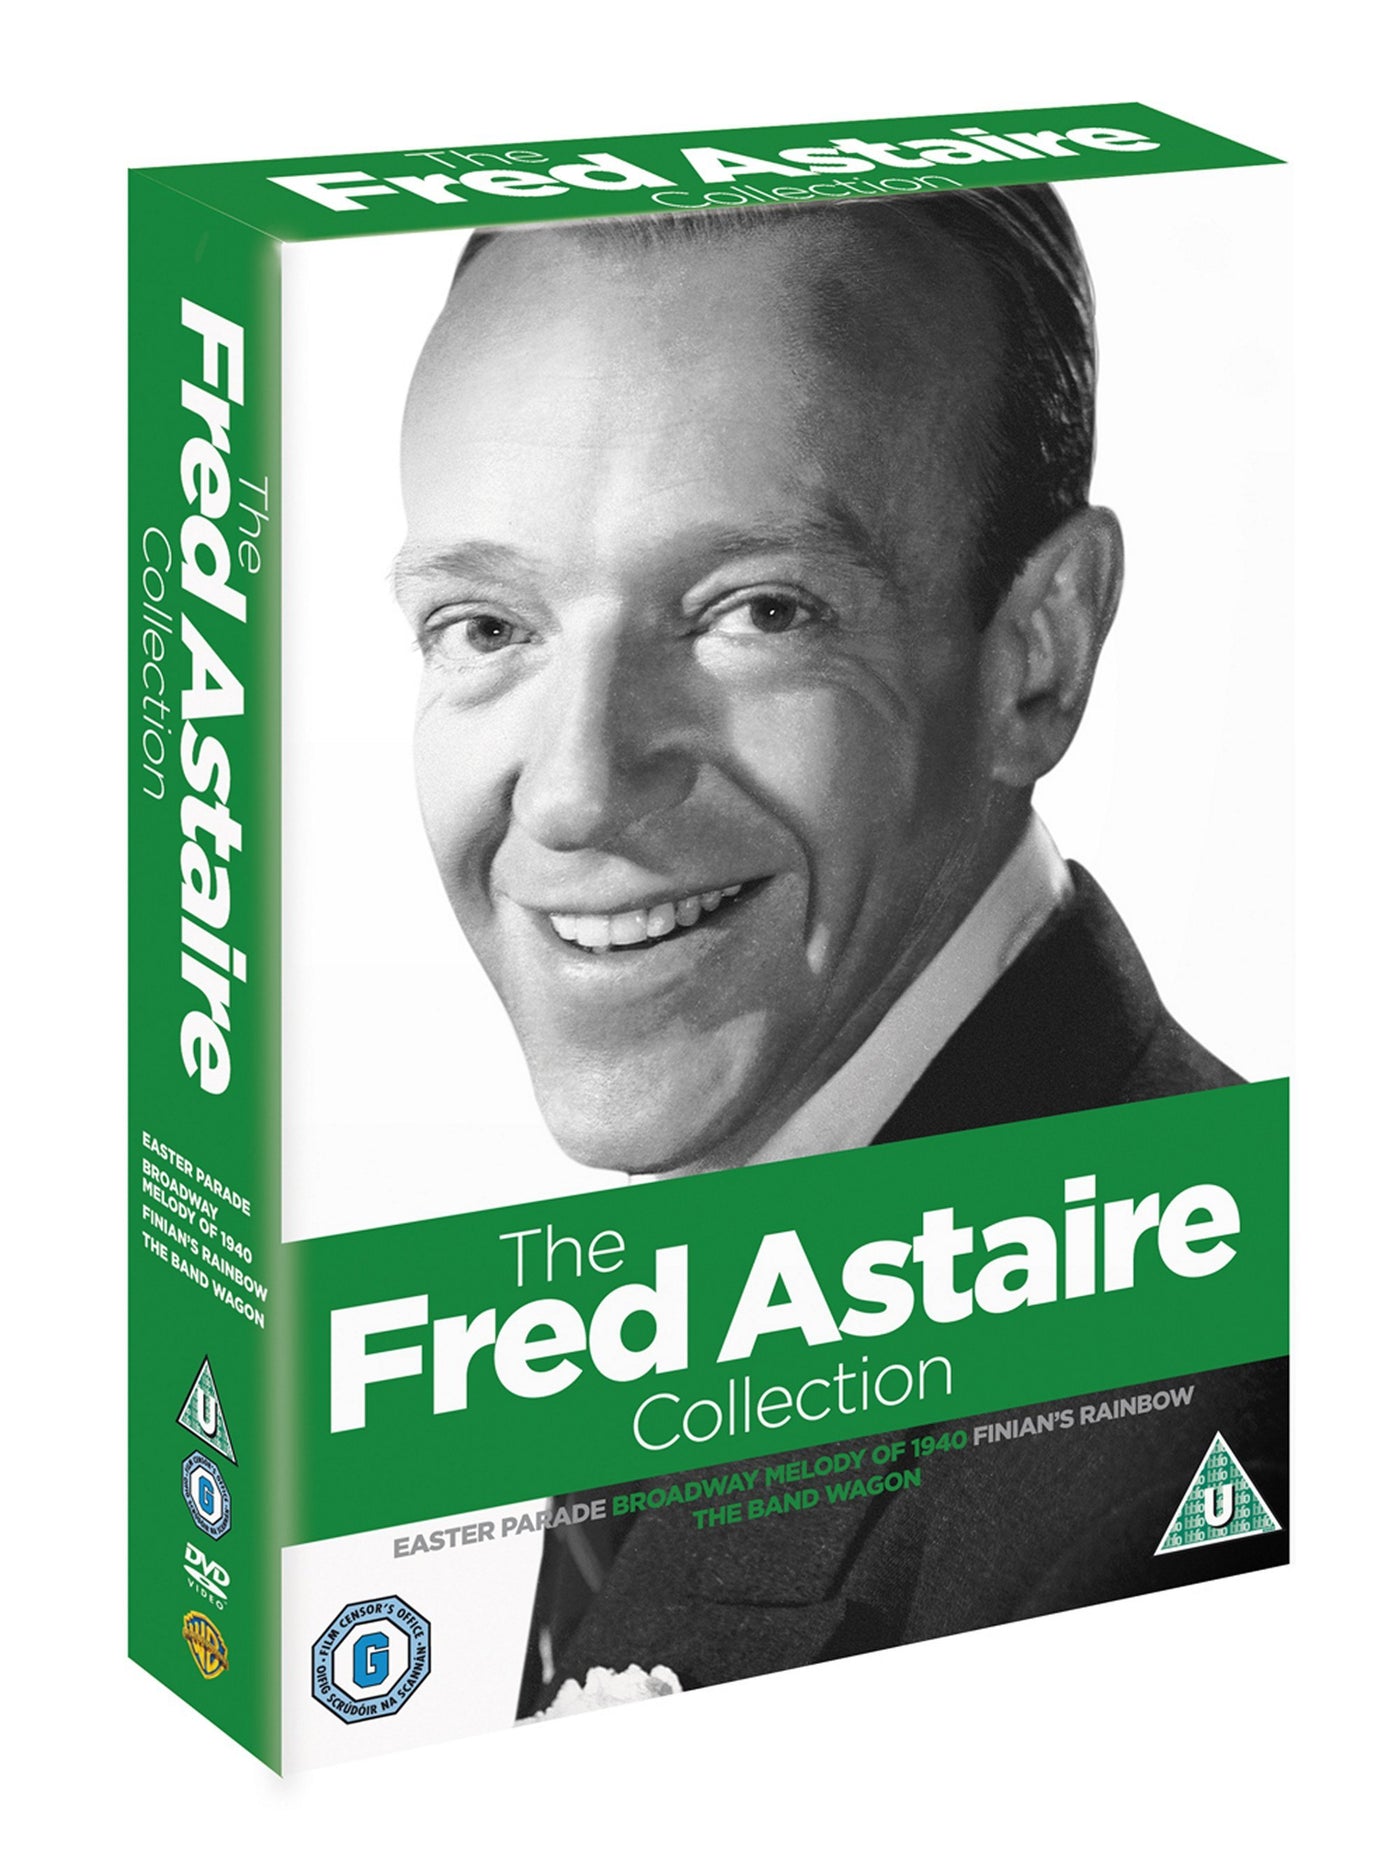 The Fred Astaire Collection of 1940 (DVD)